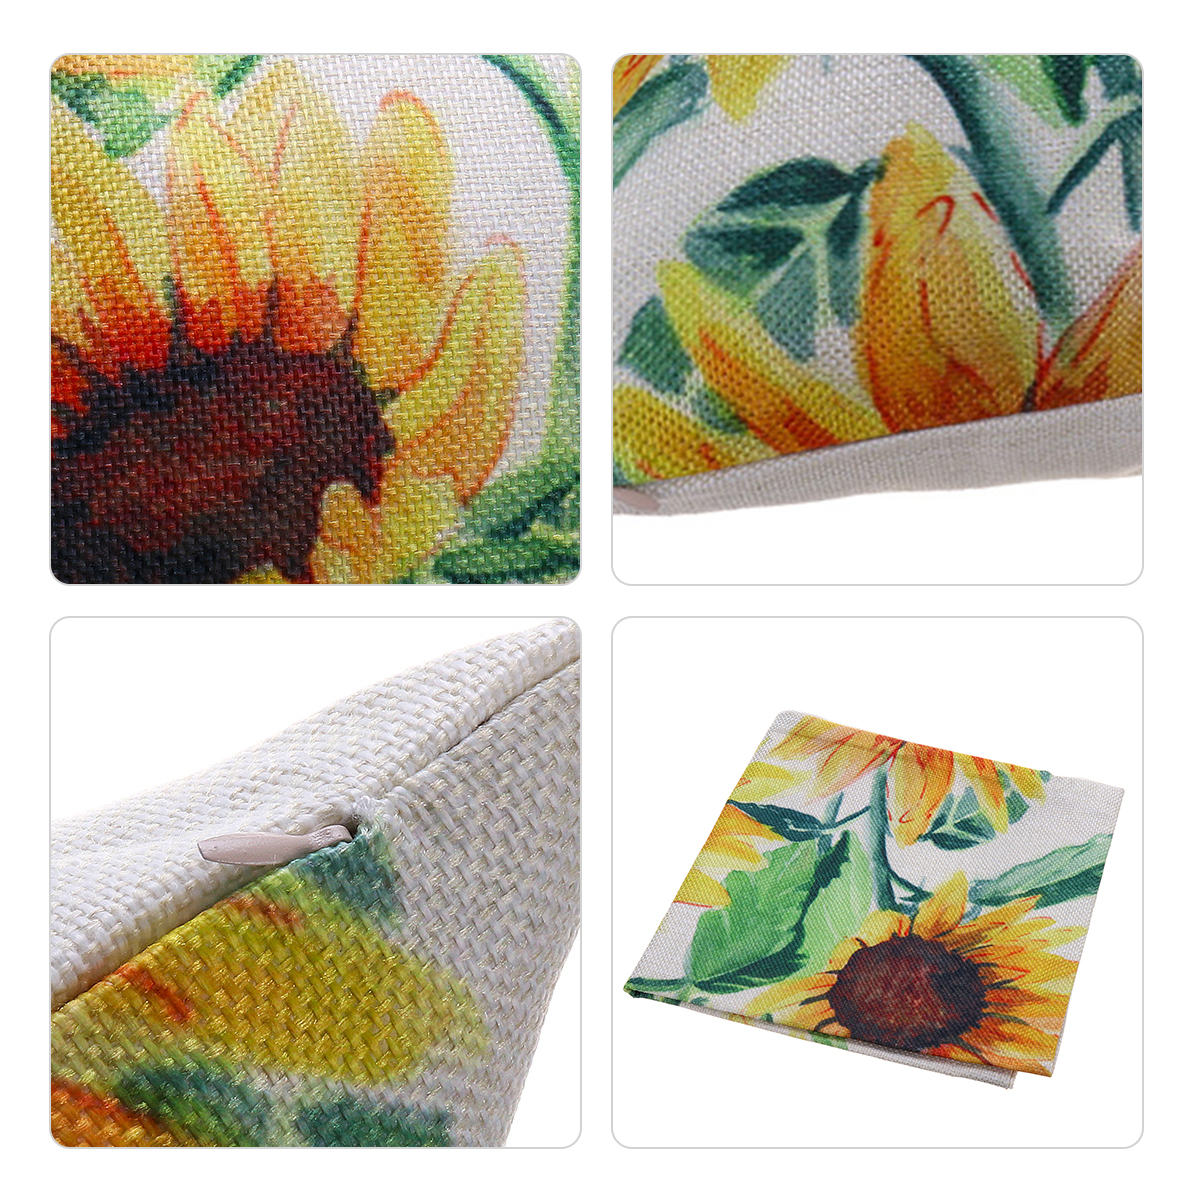 18x18inch-Square-Linen-Sunflowers-Cushion-Pillow-Case-Protective-Cover-1829530-5